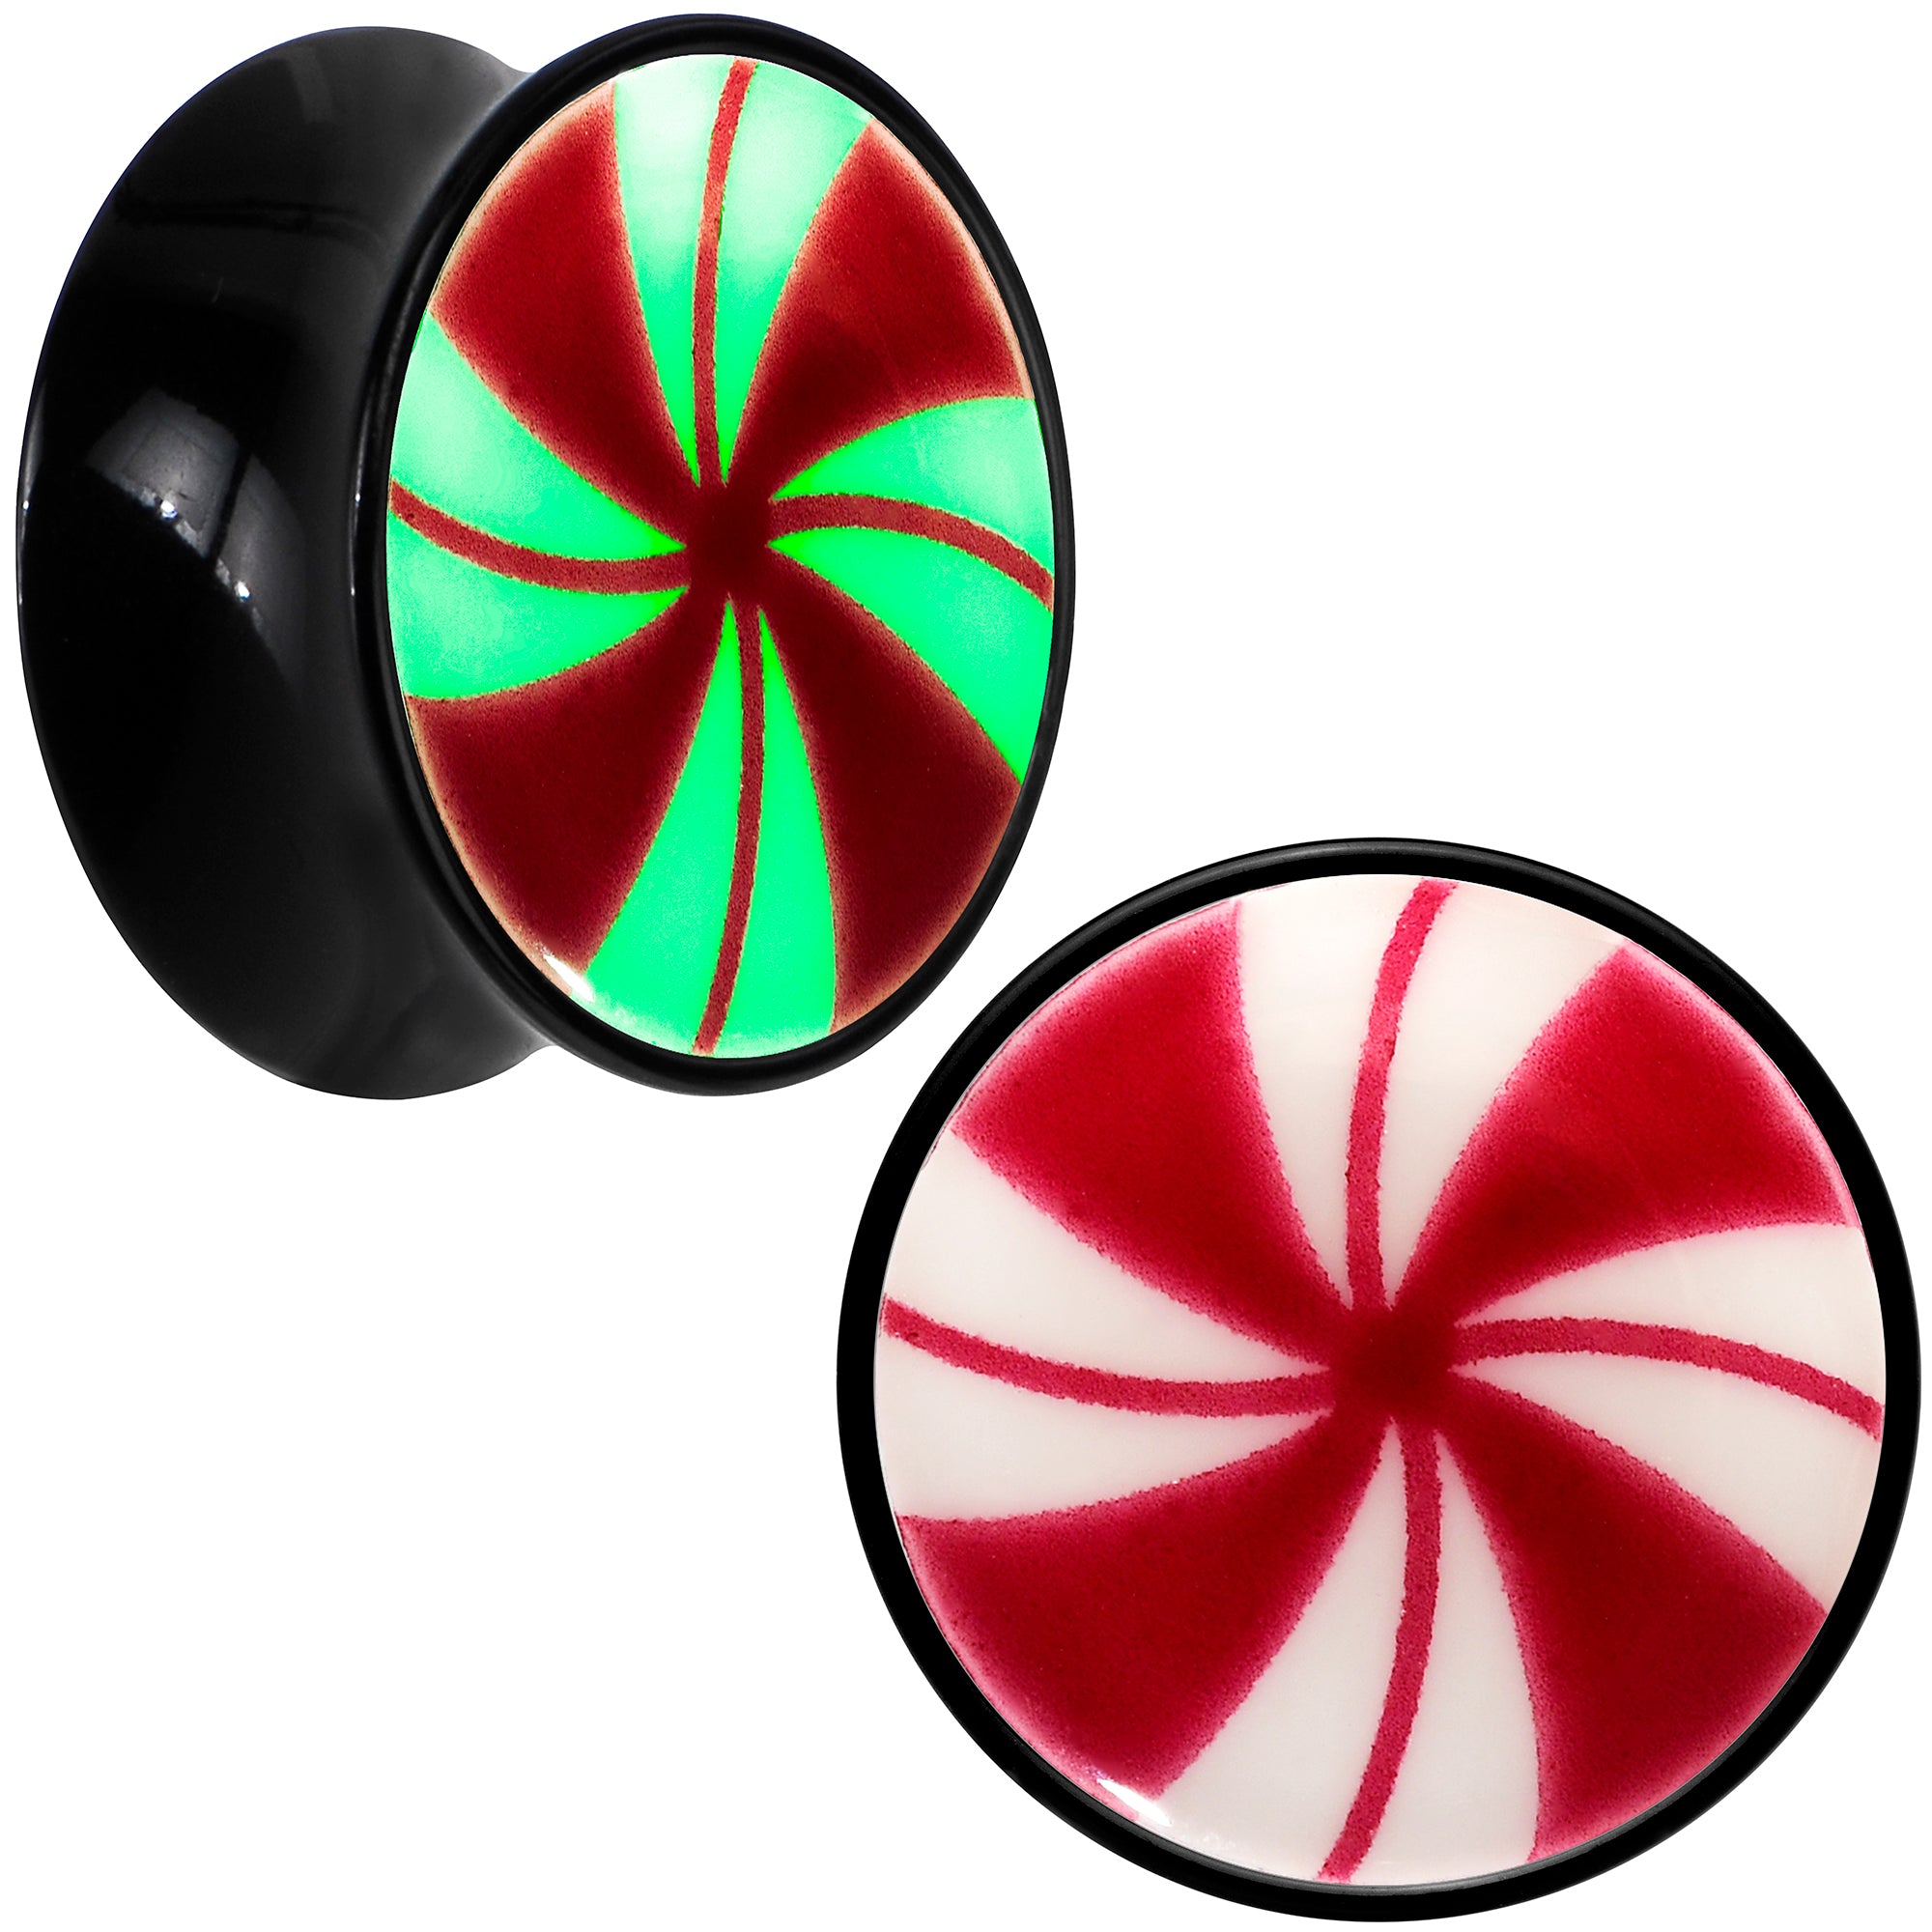 Black Acrylic Peppermint Candy Glow in Dark Double Flare Plug Set